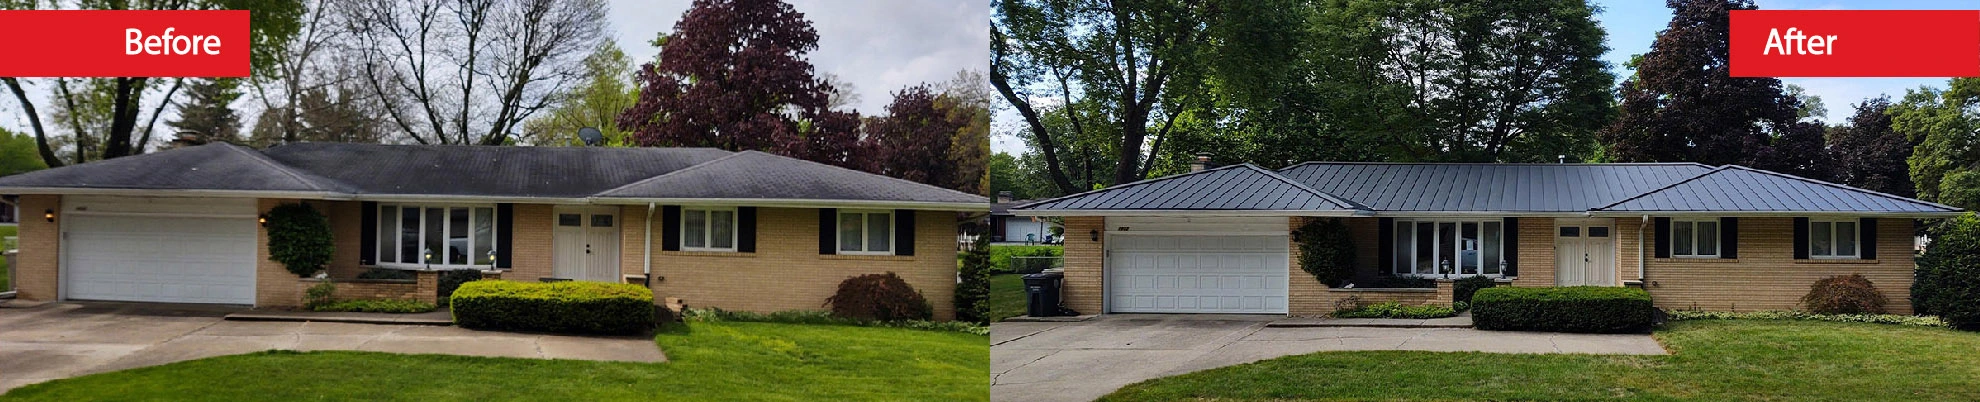 Before and After picture of a new roof installation.